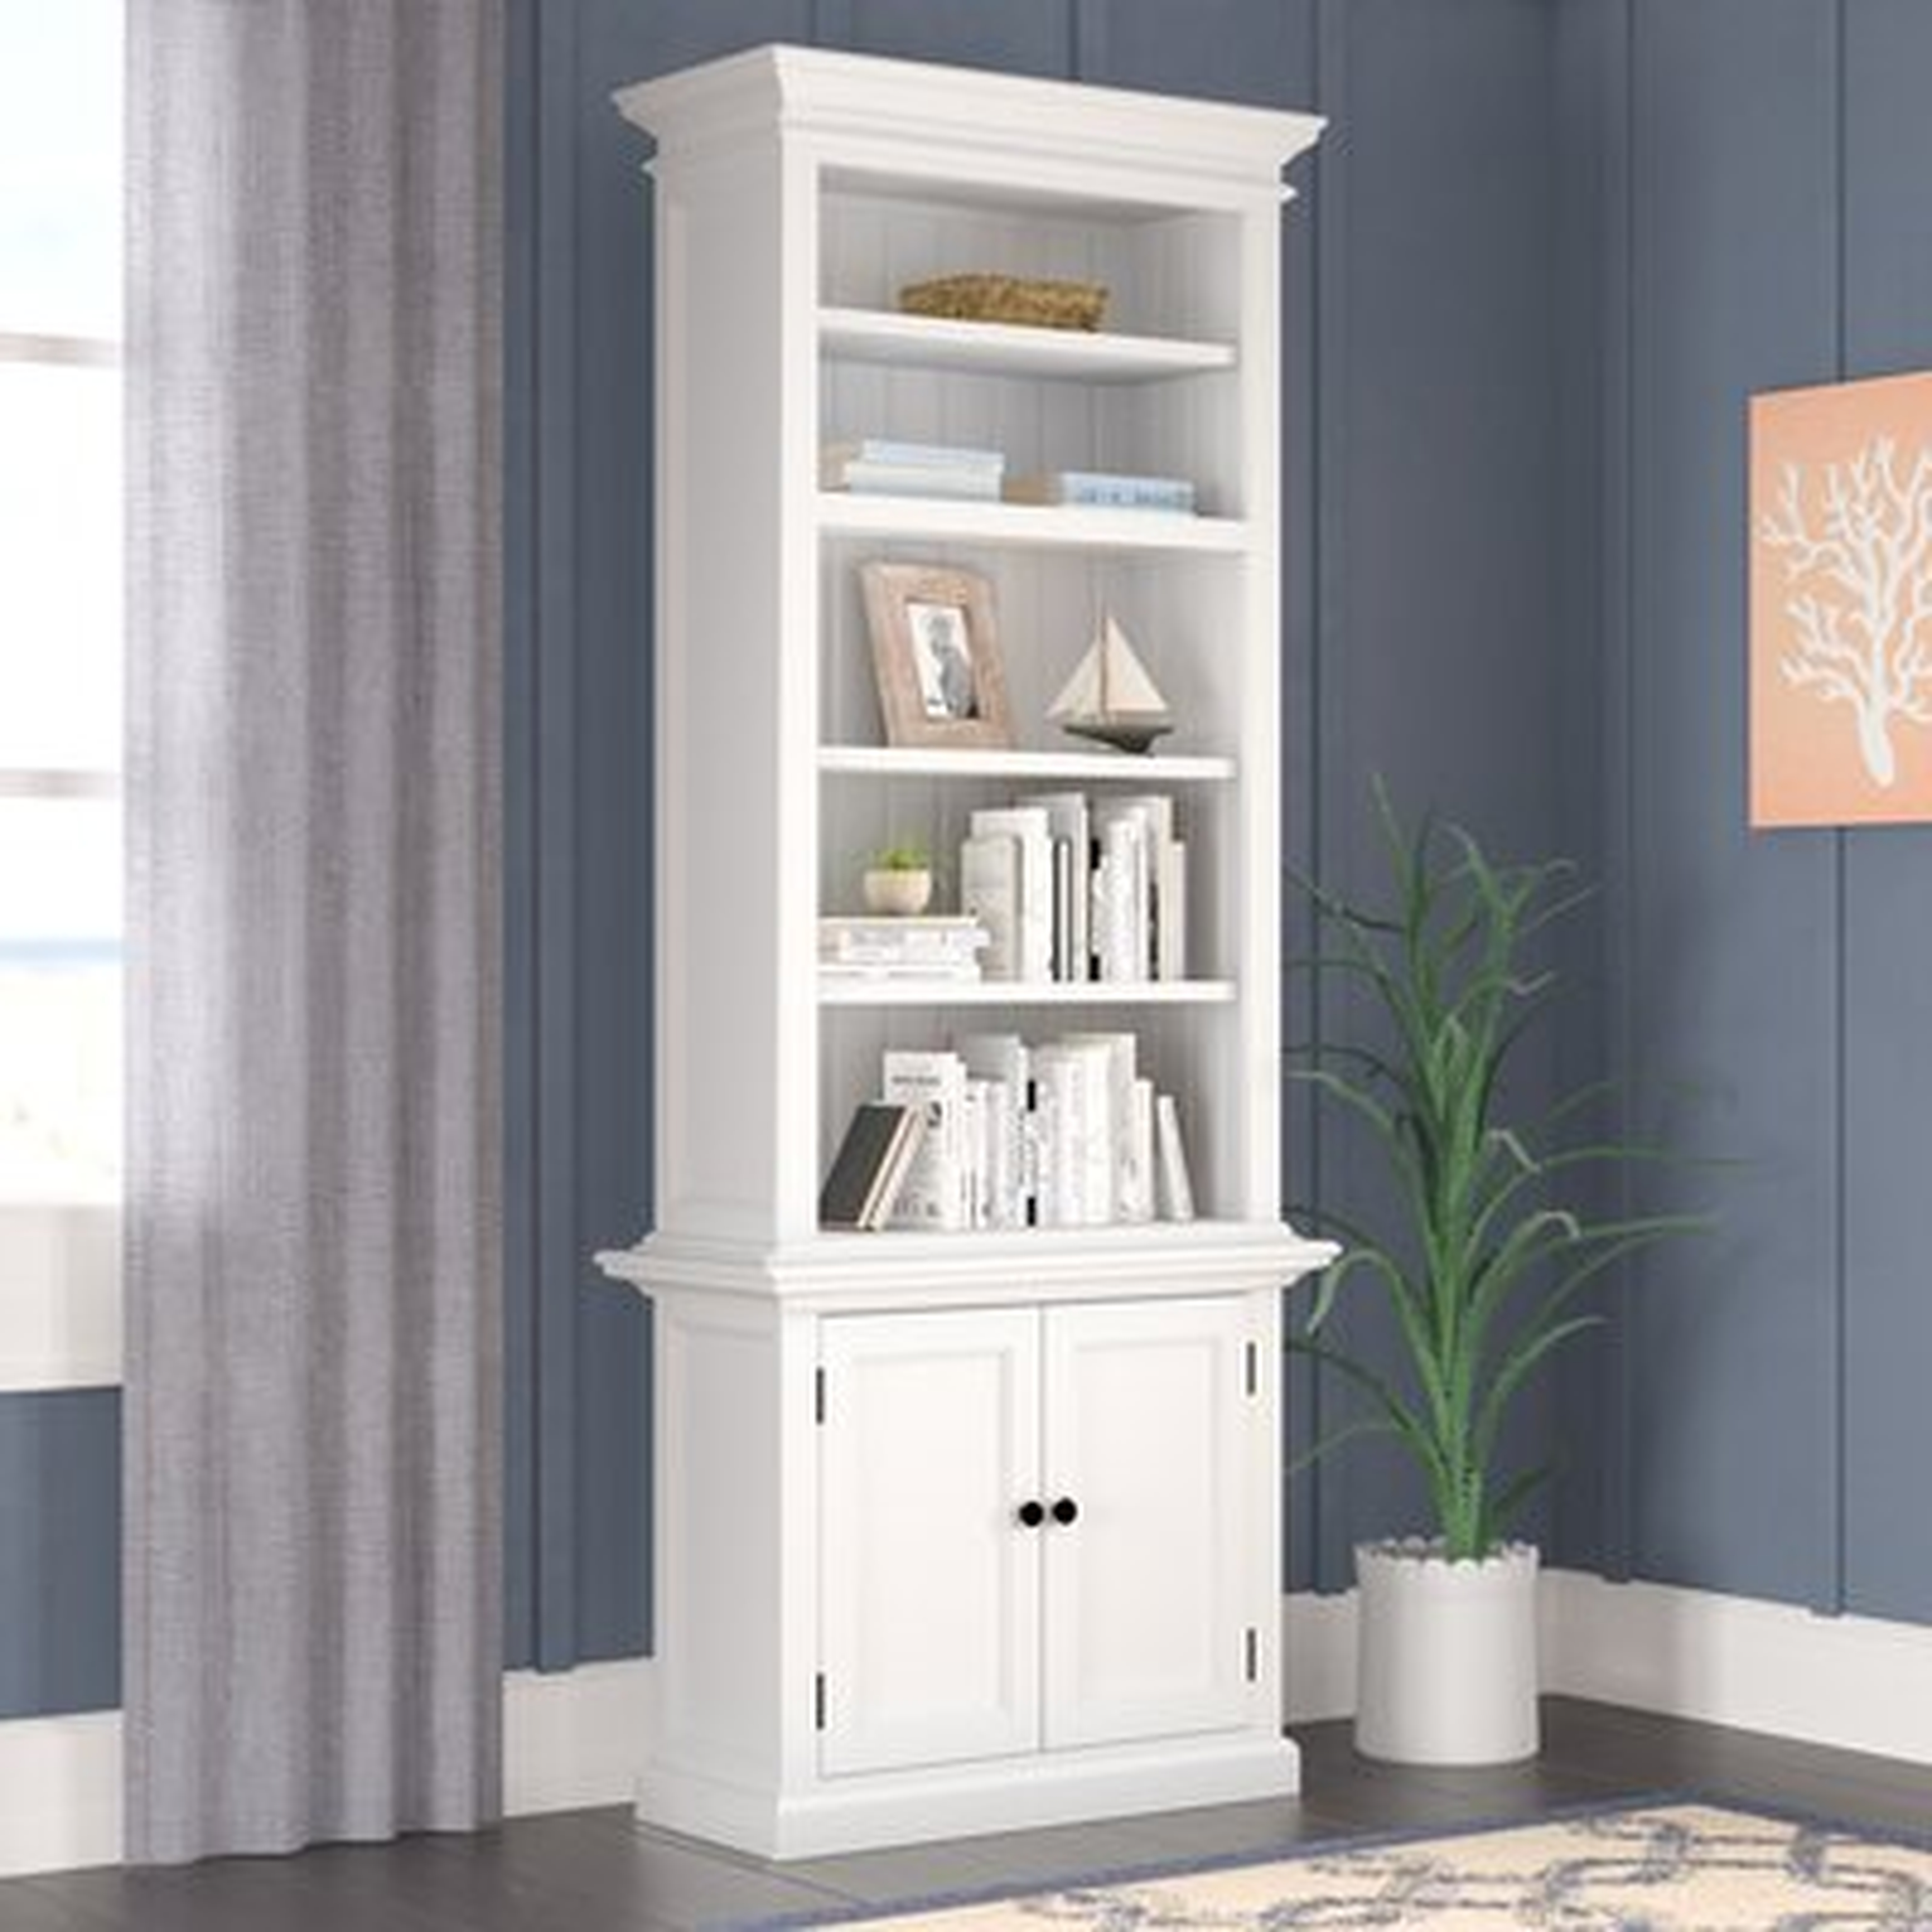 Cate 86.6" H x 35.43" W Solid Wood Standard Bookcase - Wayfair